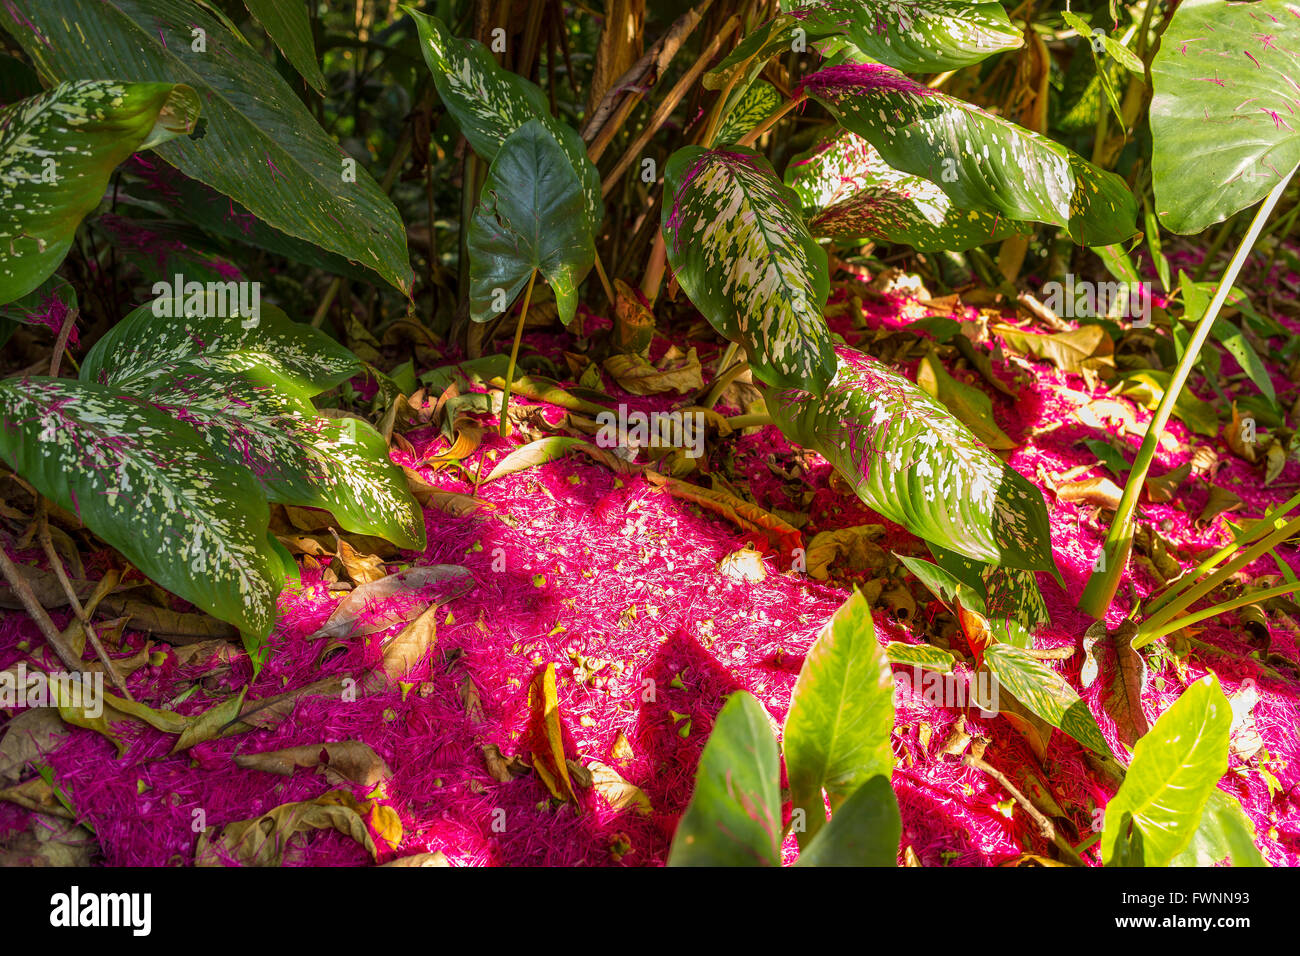 OSA PENINSULA, COSTA RICA - Tropical rain forest floor, with flower petals from the water apple tree. Syzygium malaccensis Stock Photo